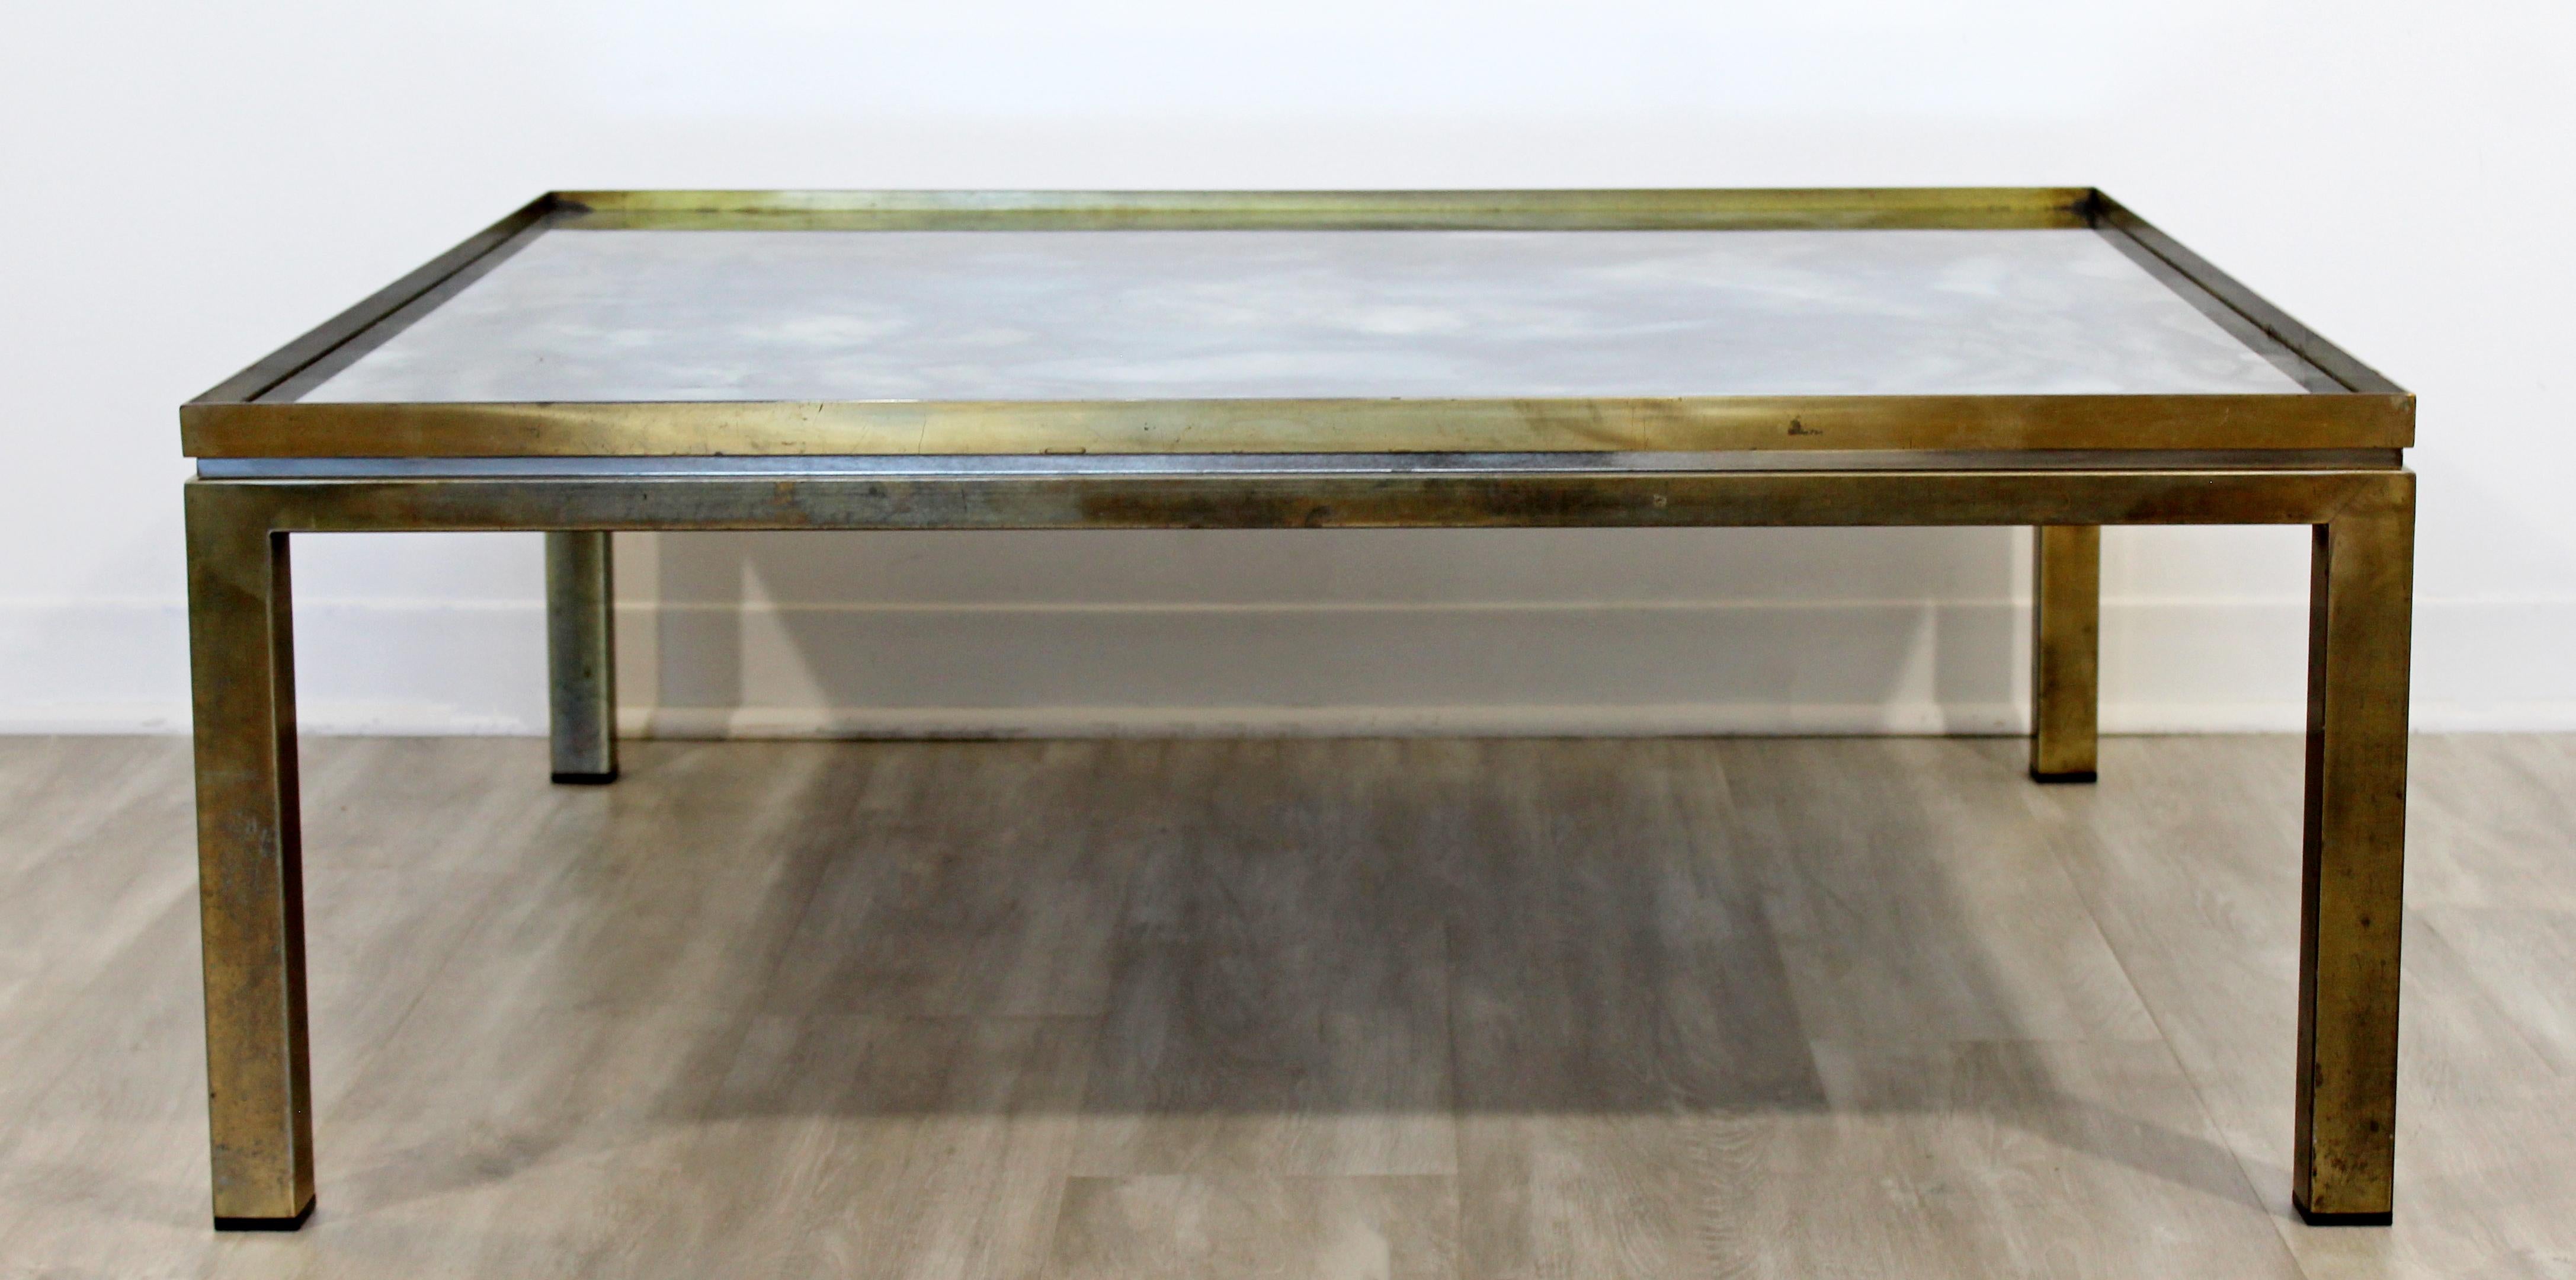 American Mid-Century Modern Mastercraft Bronze and Glass Square Coffee Table, 1960s